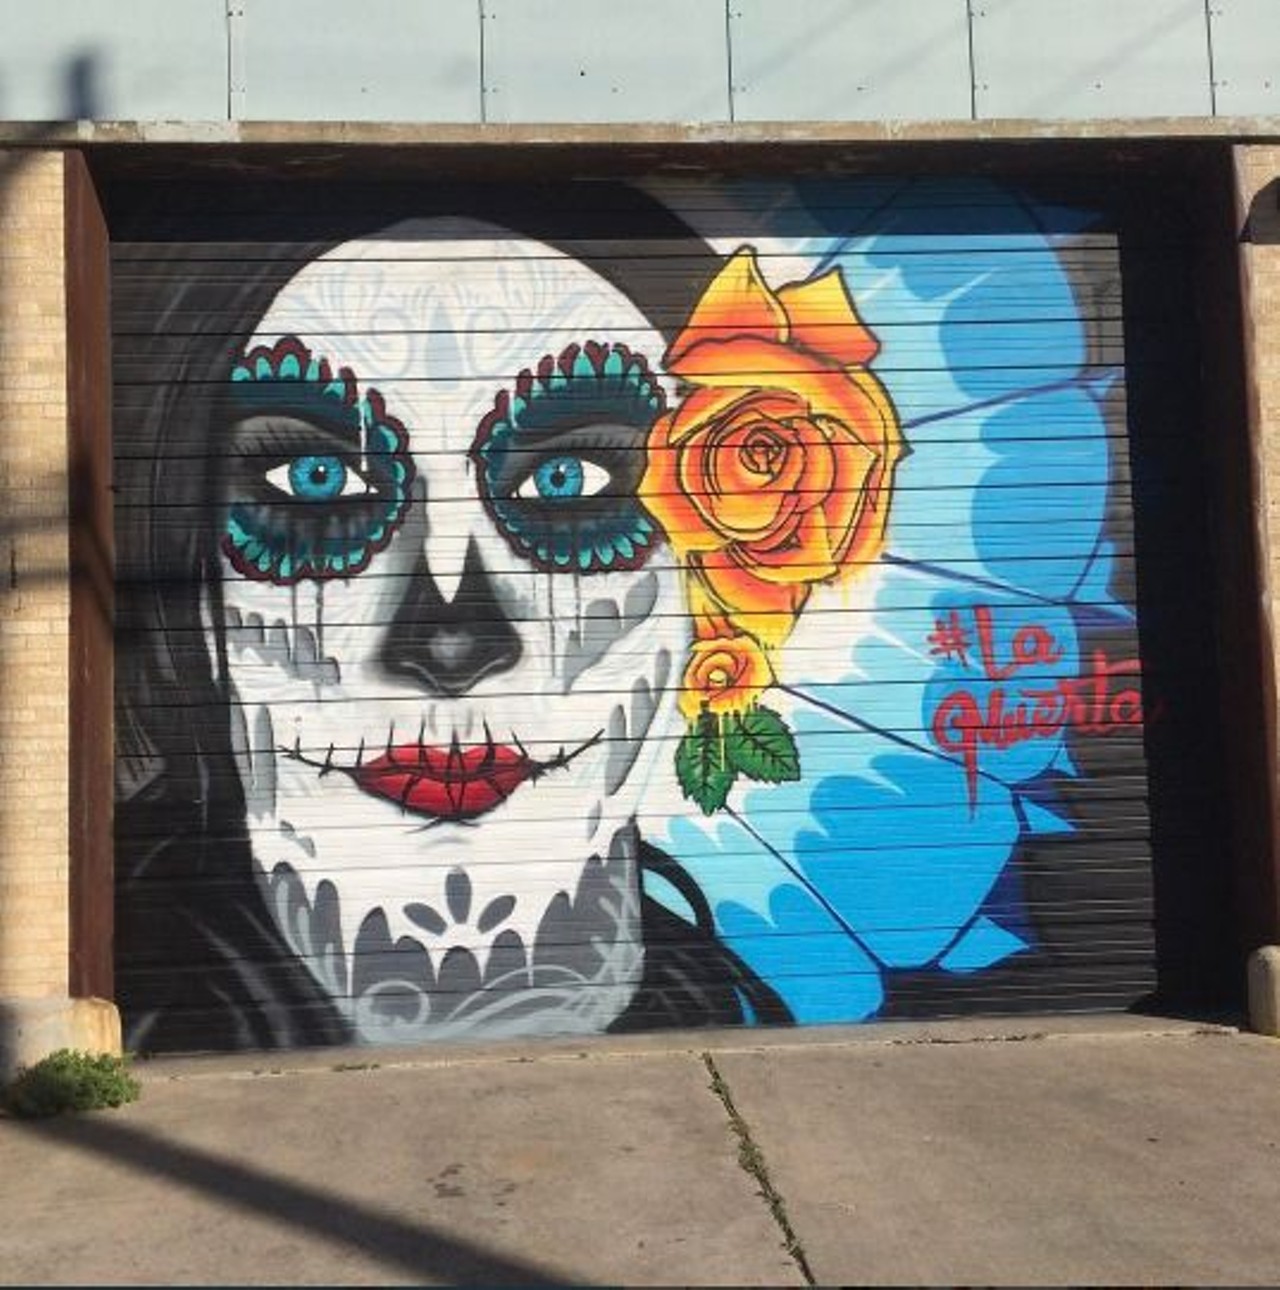 Visit Southtown
Southtown, 
visitsanantonio.com/english/Explore
One of the hippest areas of San Antonio, Southtown has plenty to look at &#151; for free. Go and see for yourself the amazing sights of this free endeavor.
Photo via Instagram 
southtownsatx
